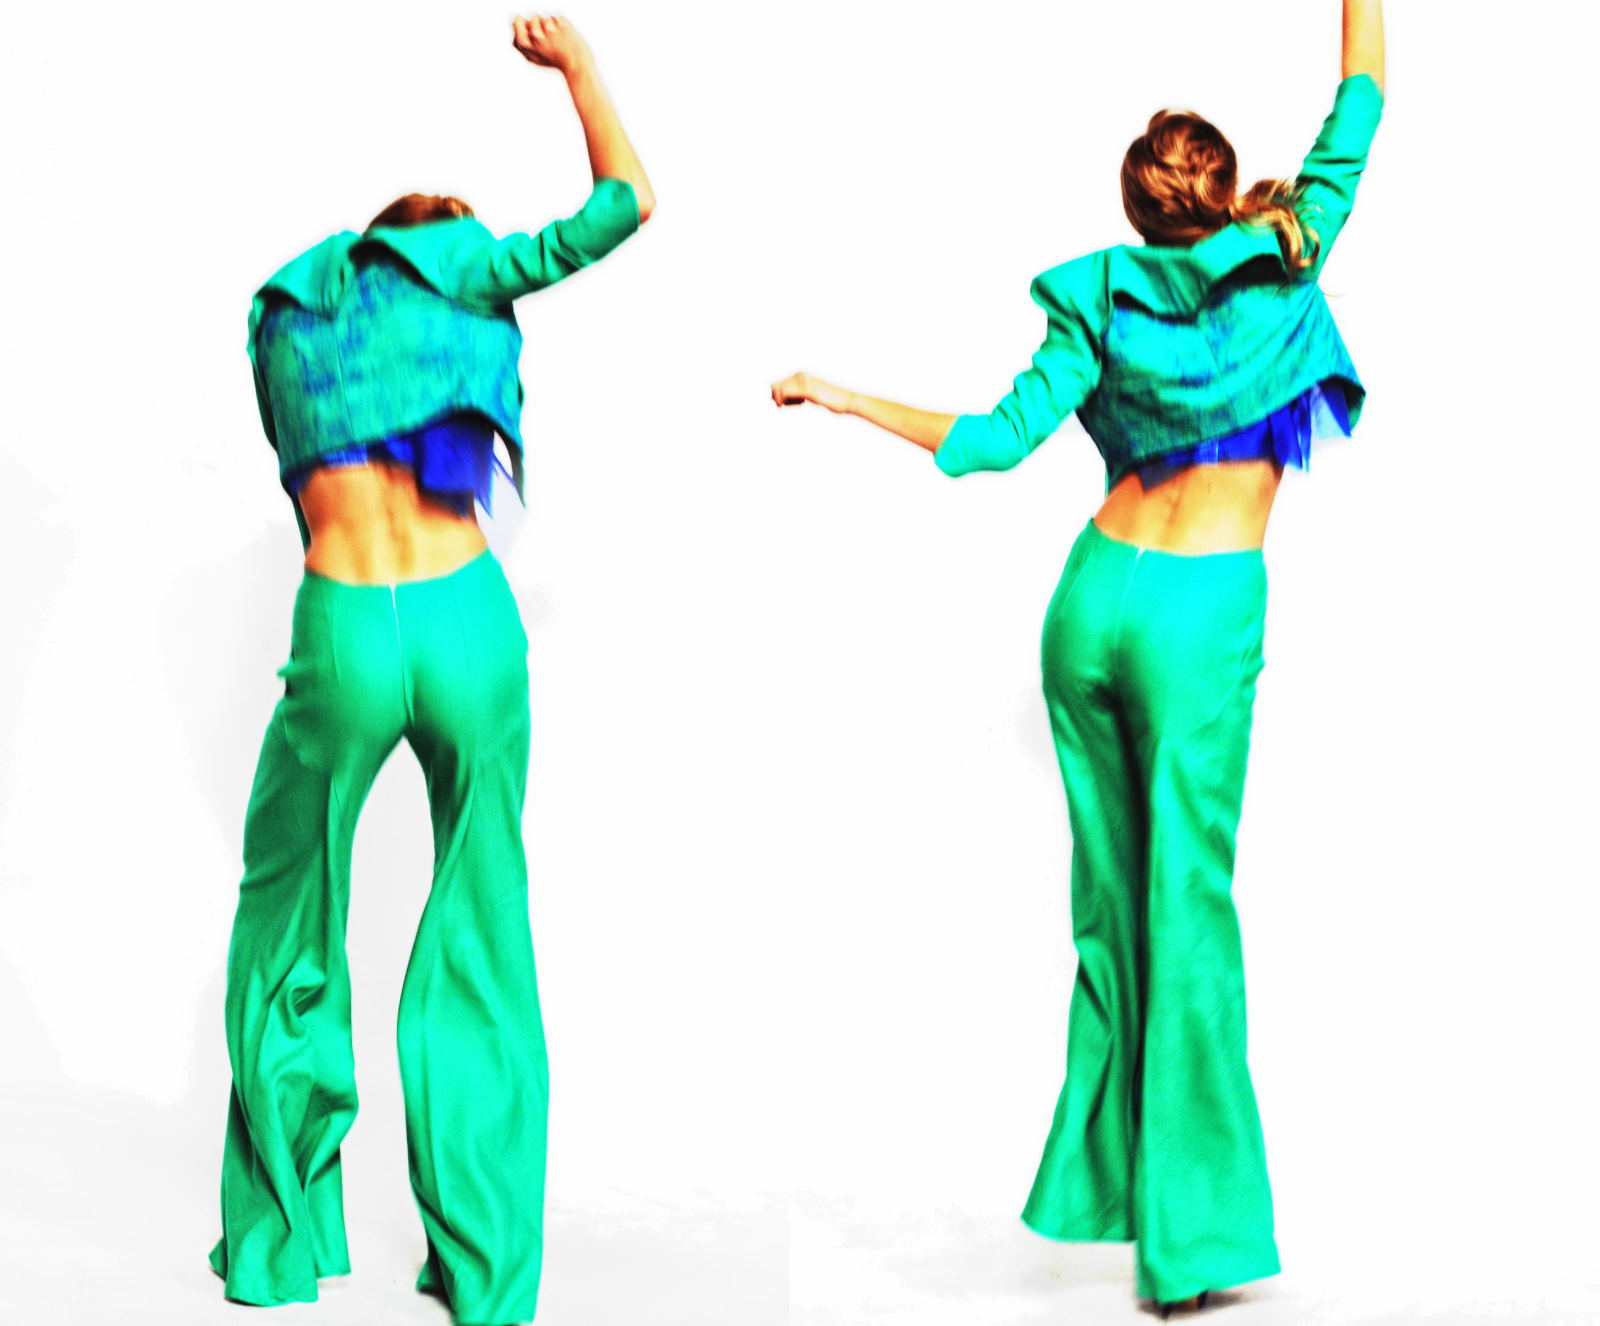 Jumping and spinning, Couture Studio Shoot, green pants suit from behind. Photography by Kent Johnson.